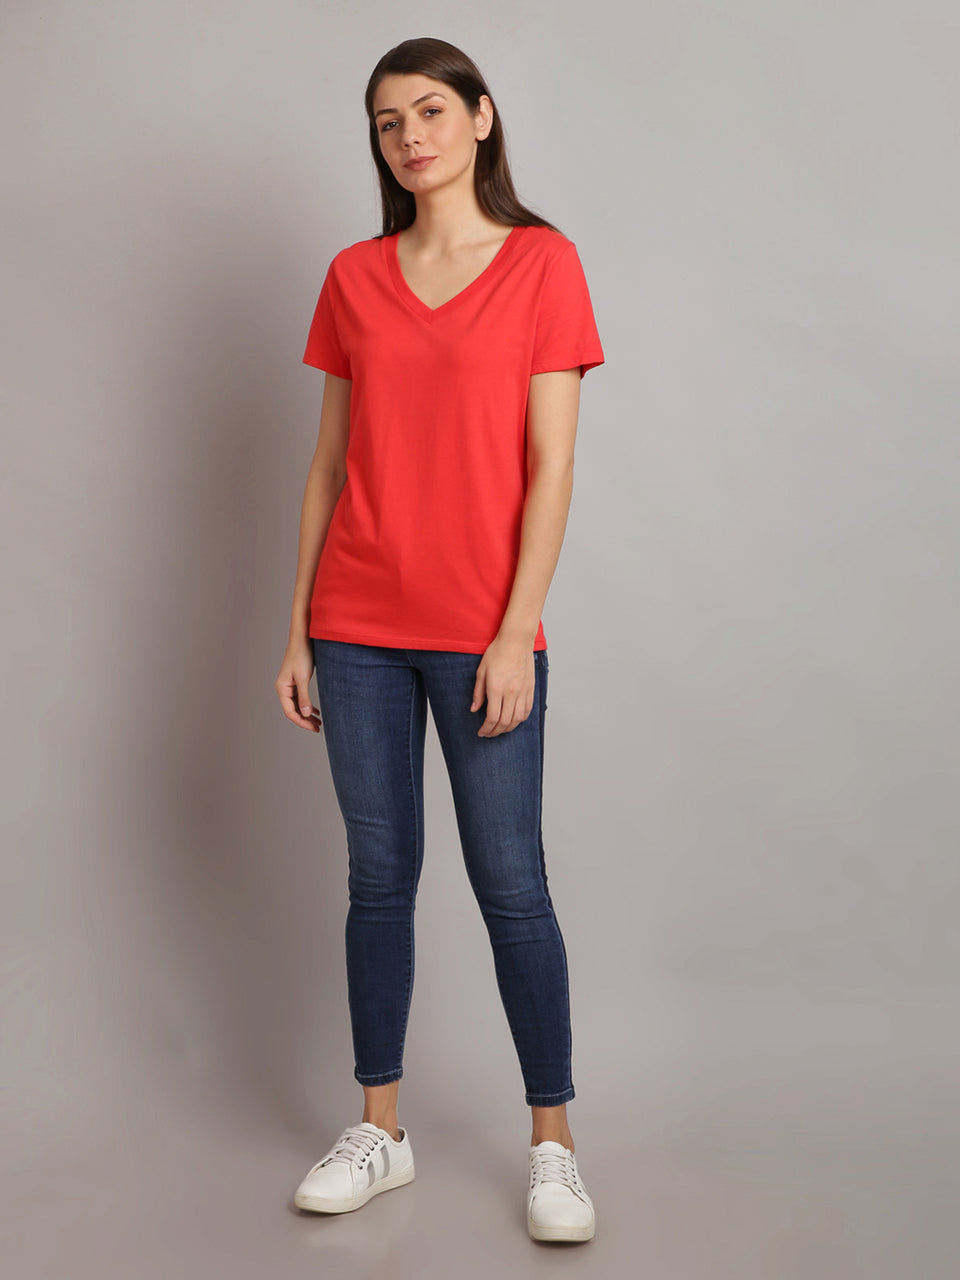 women solid red cotton v-neck t-shirt